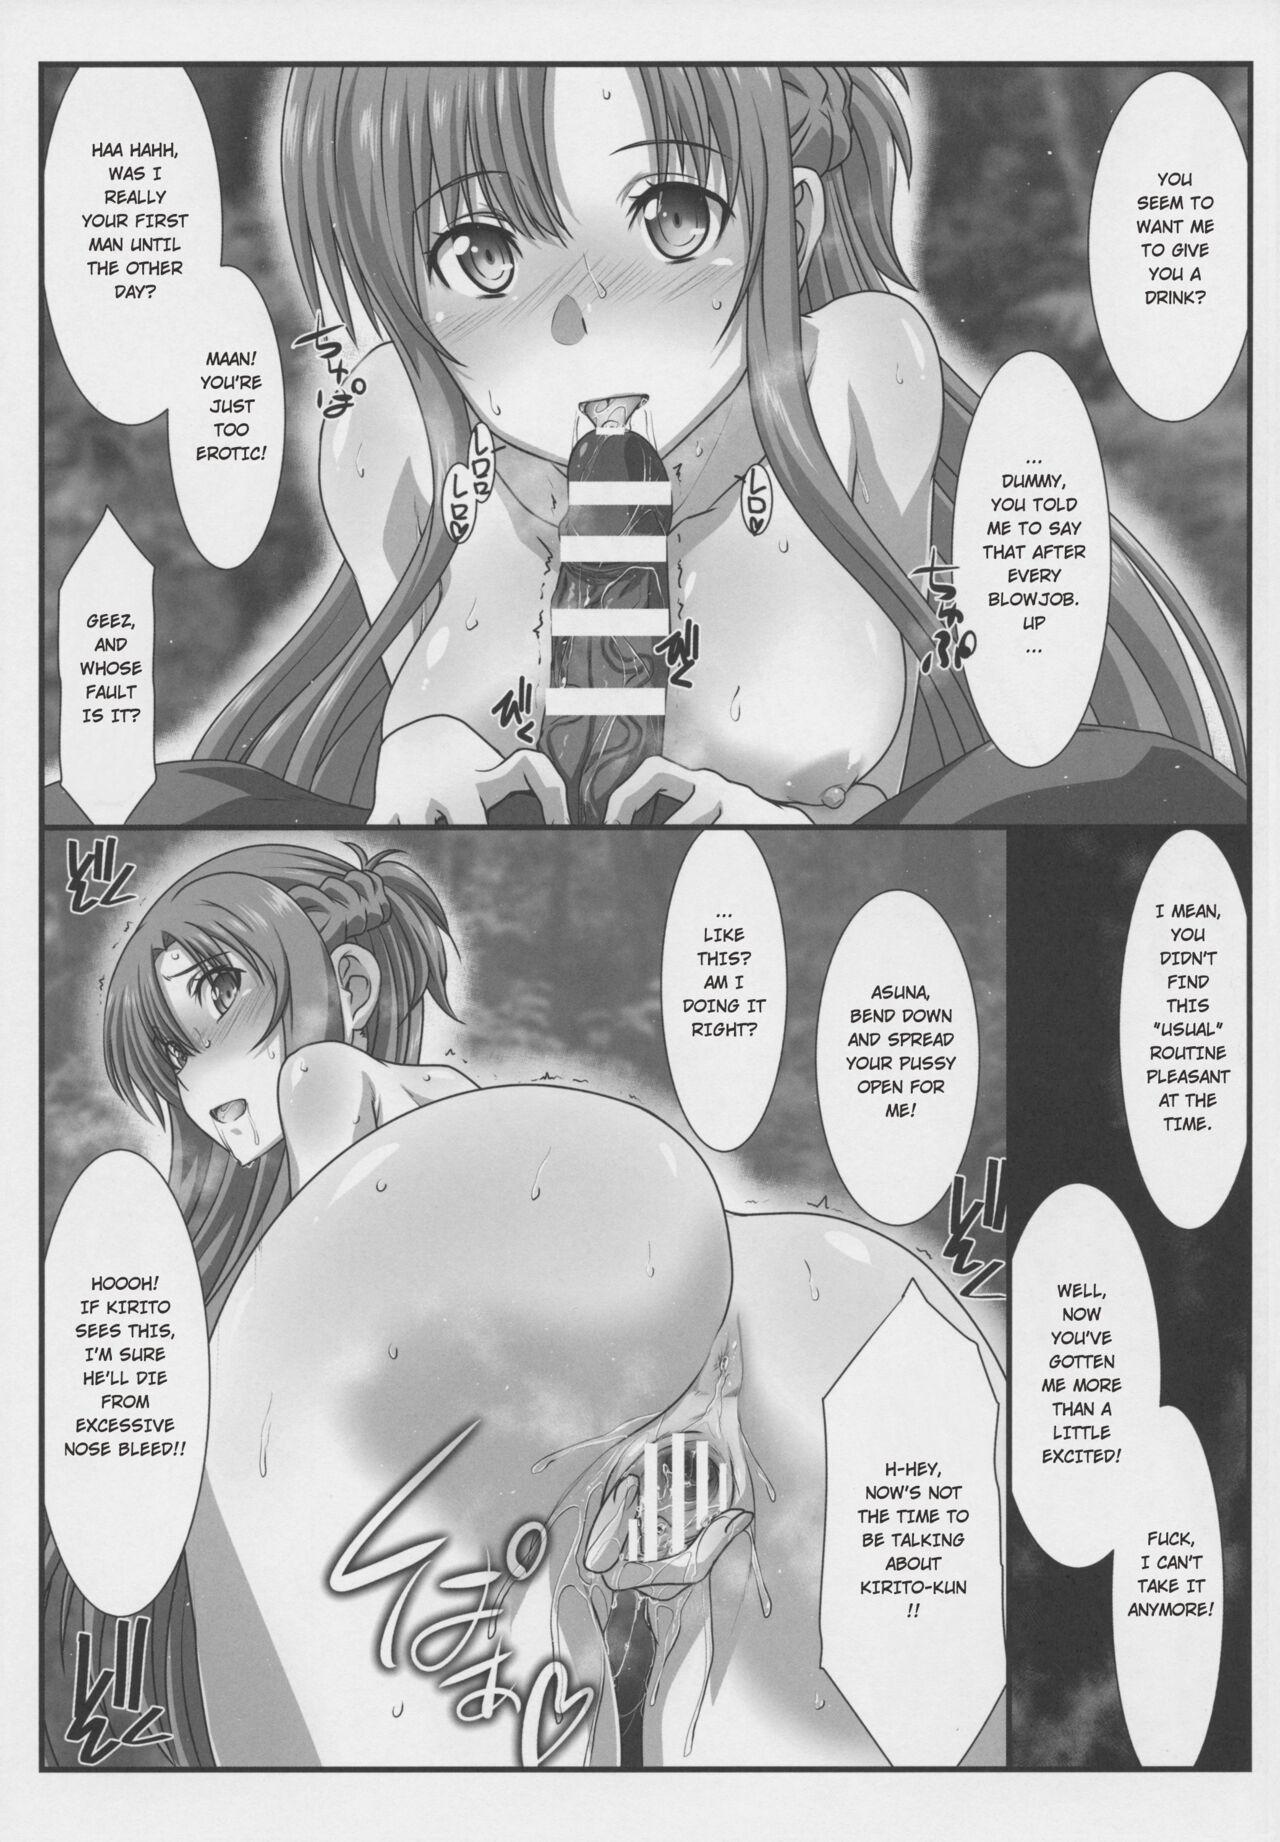 Gaystraight Astral Bout Ver. 45 - Sword art online Pau - Page 8